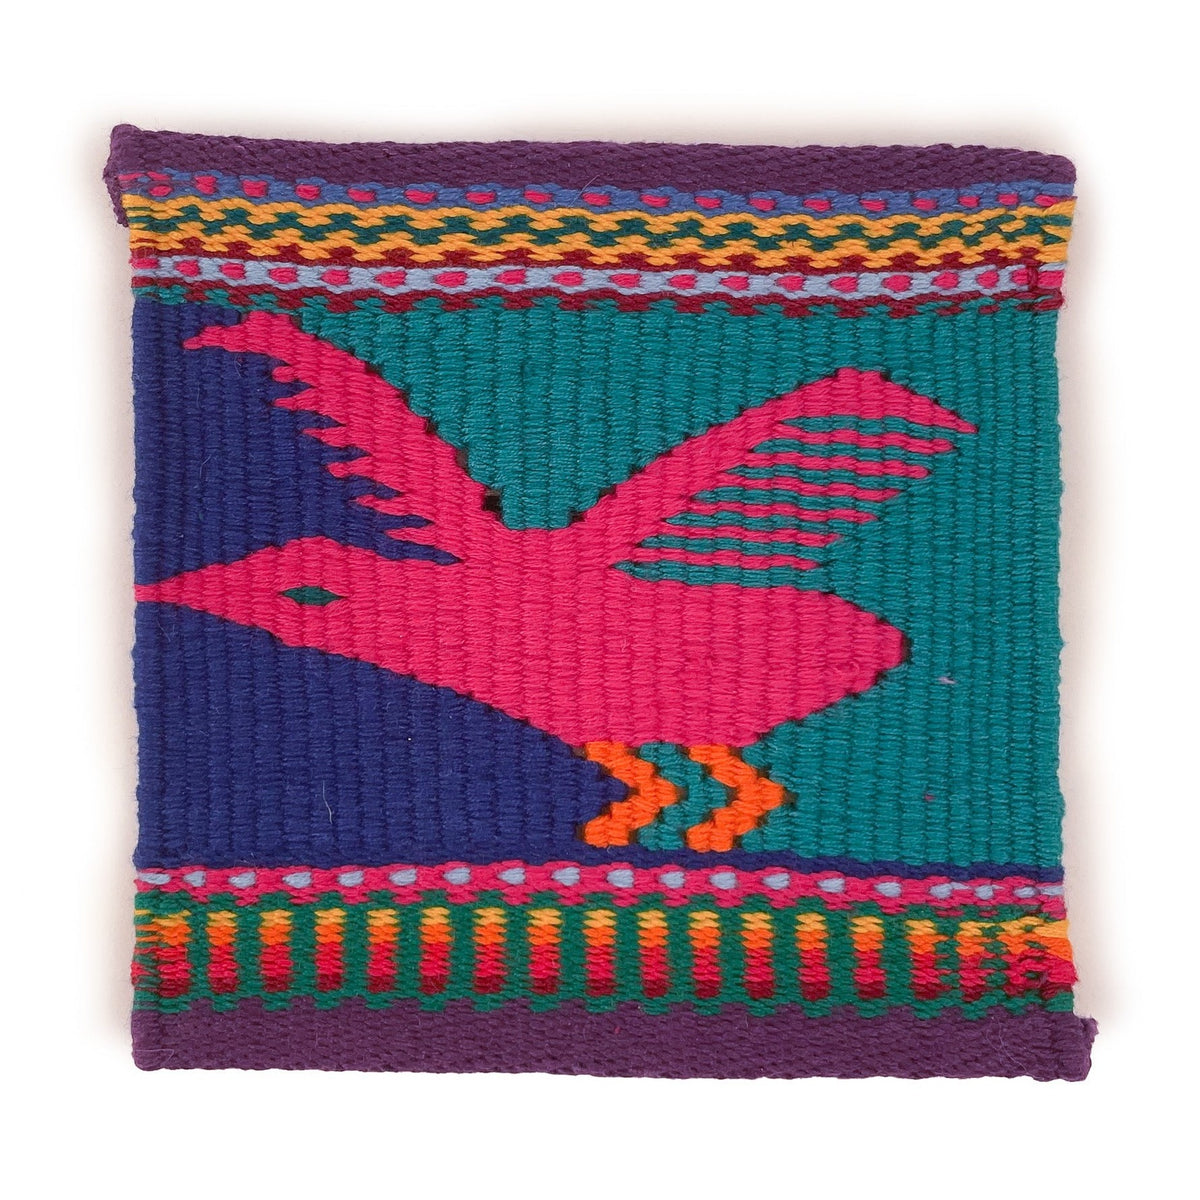 Tapestry woven coaster, featuring a bird in pink with orange legs,  on a multicolor background of teal and deep blue, with purple border and multicolor striped detail